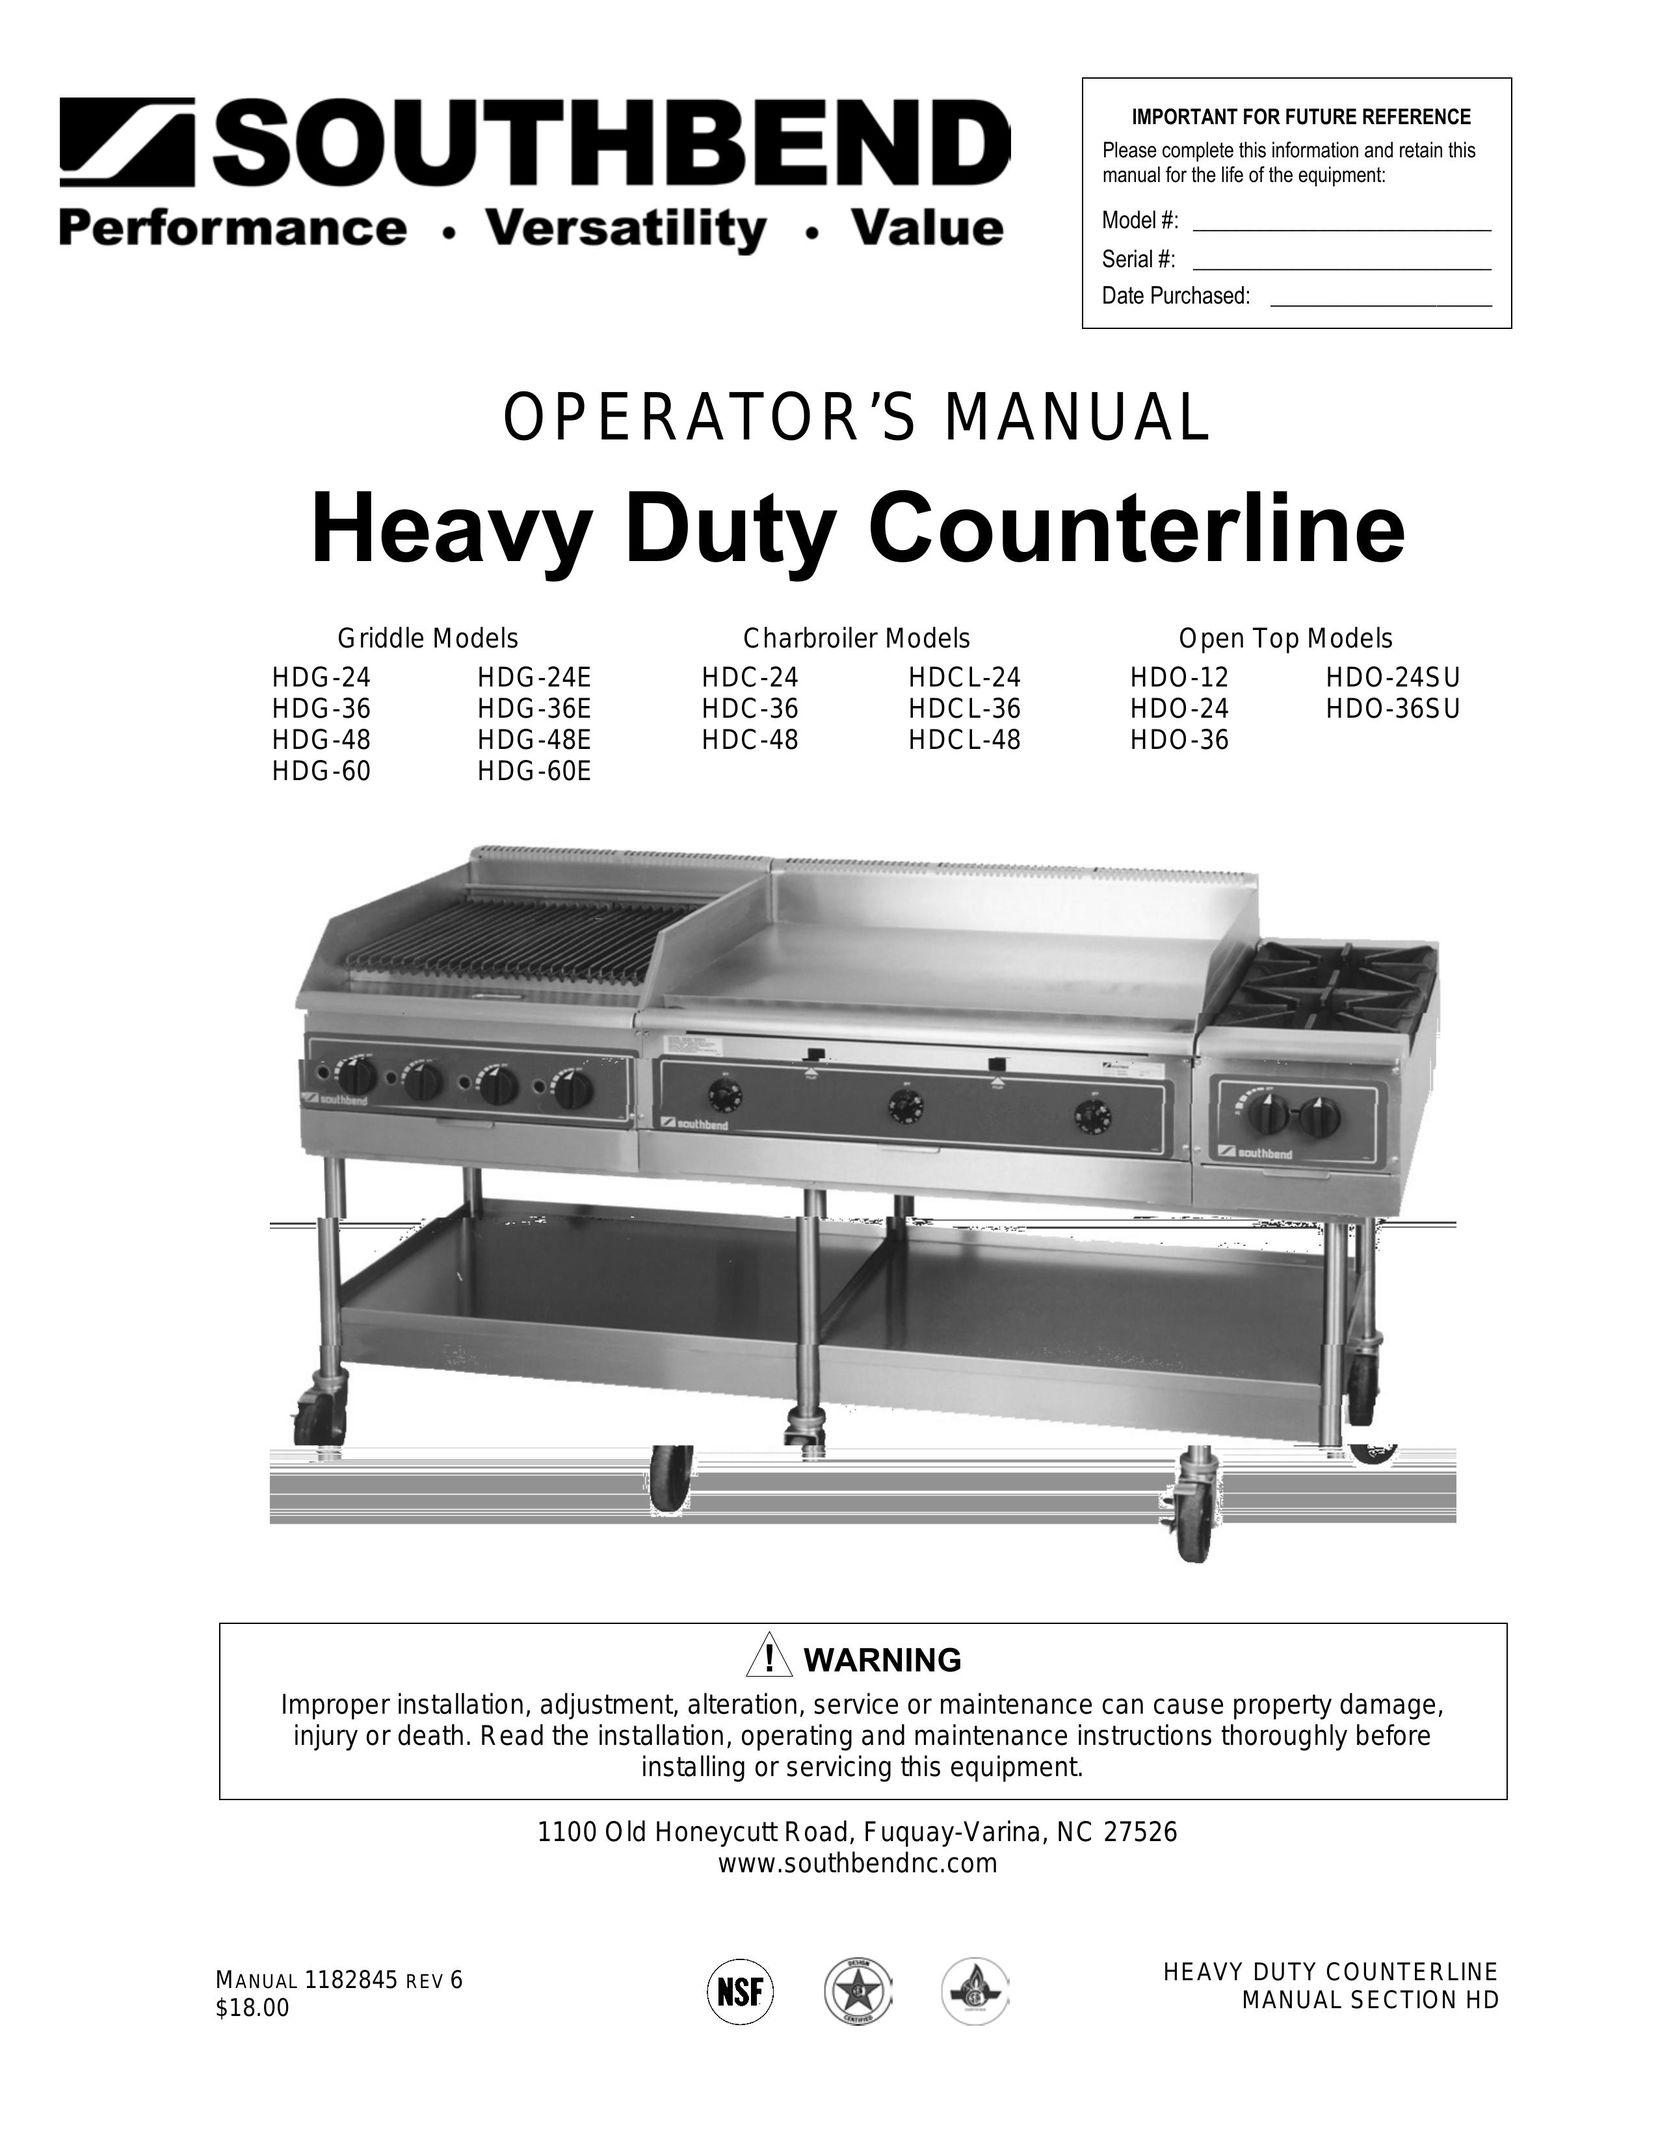 Southbend HDG-48 Cooktop User Manual